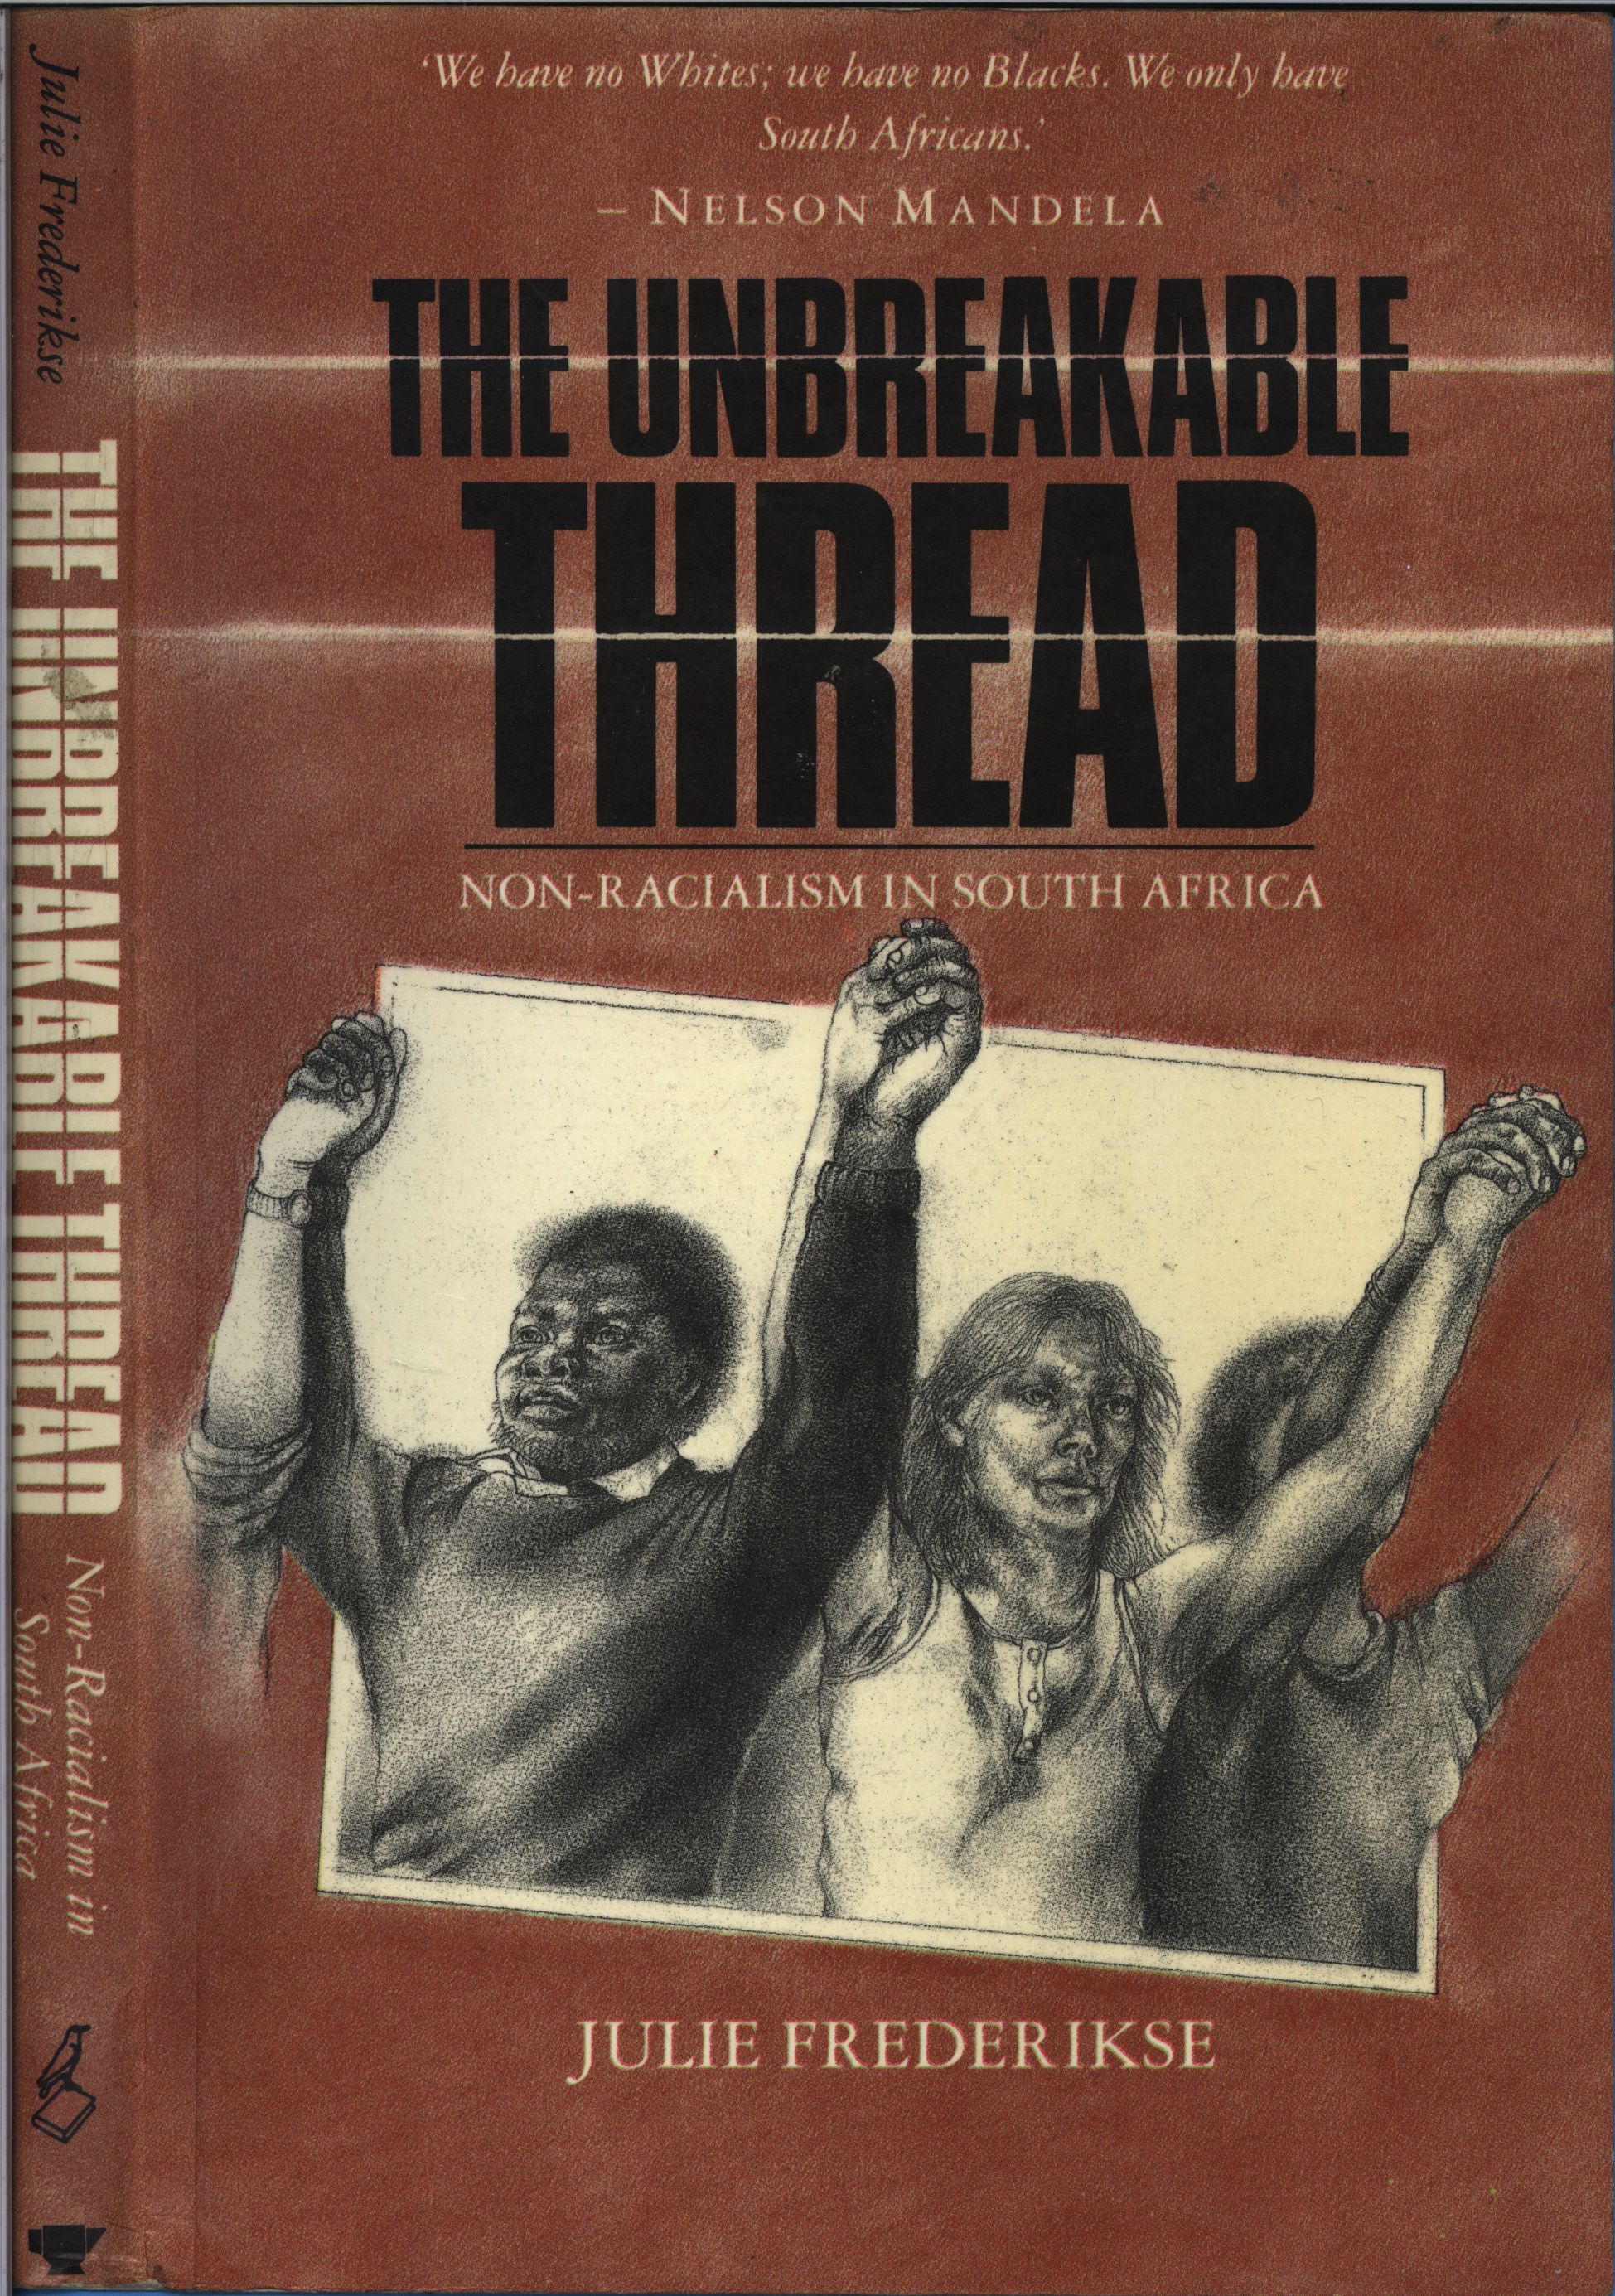 Cover of the 1990 Ravan Press edition of "The Unbreakable Thread: Non-racialism in South Africa"